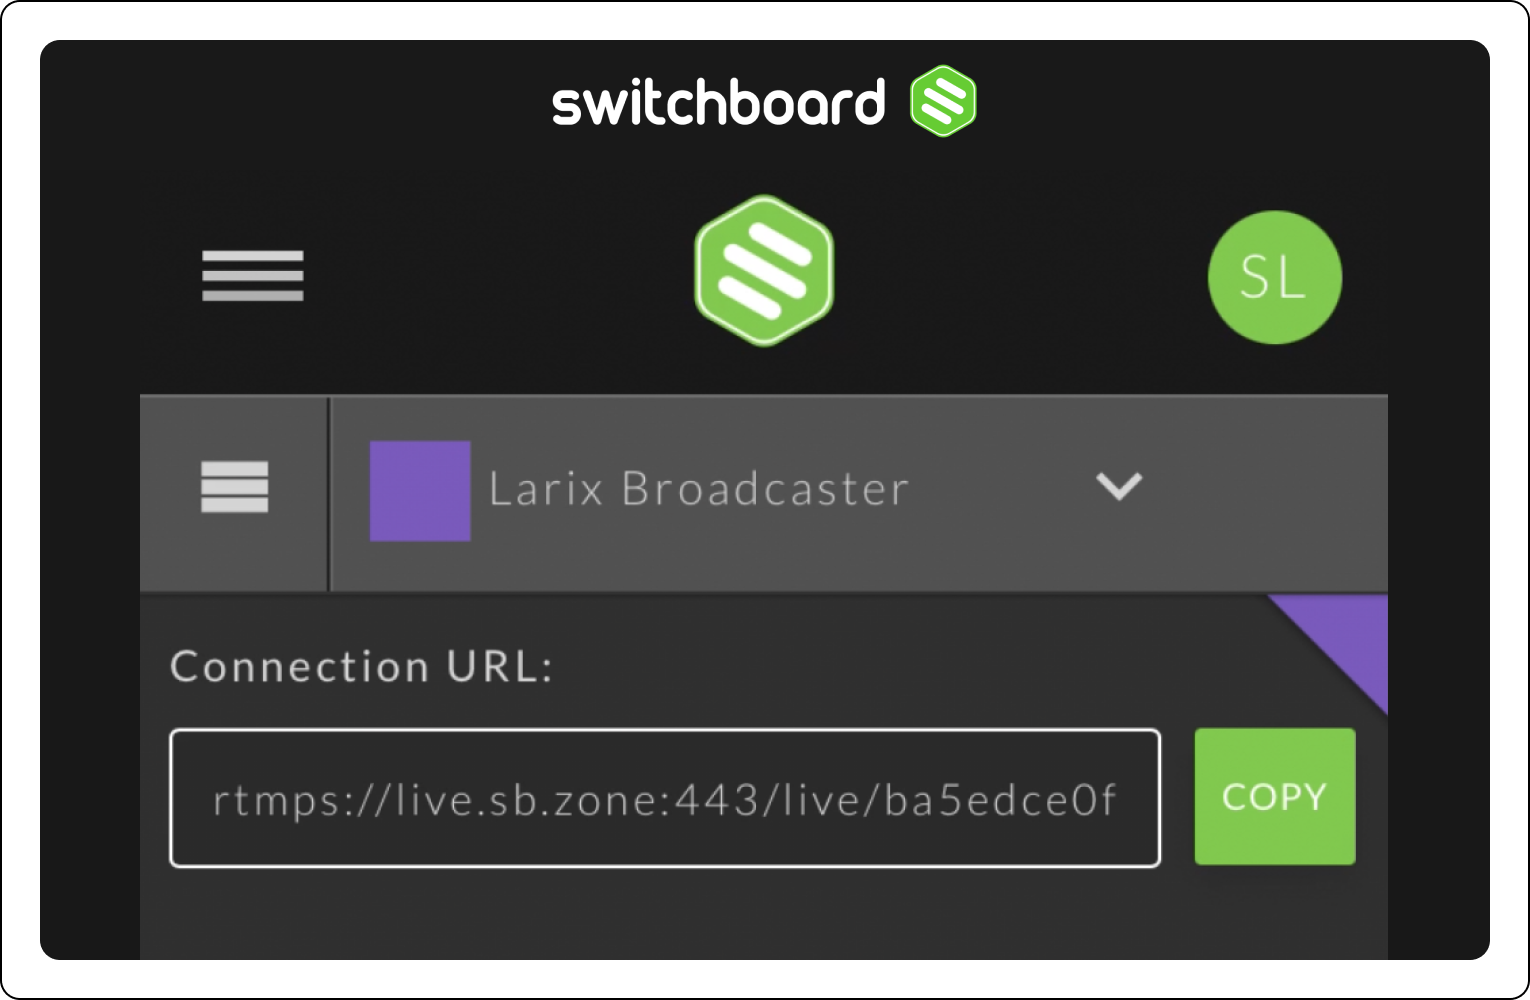 switchboard_cloud_Larix_broadcaster_connection_URL.png